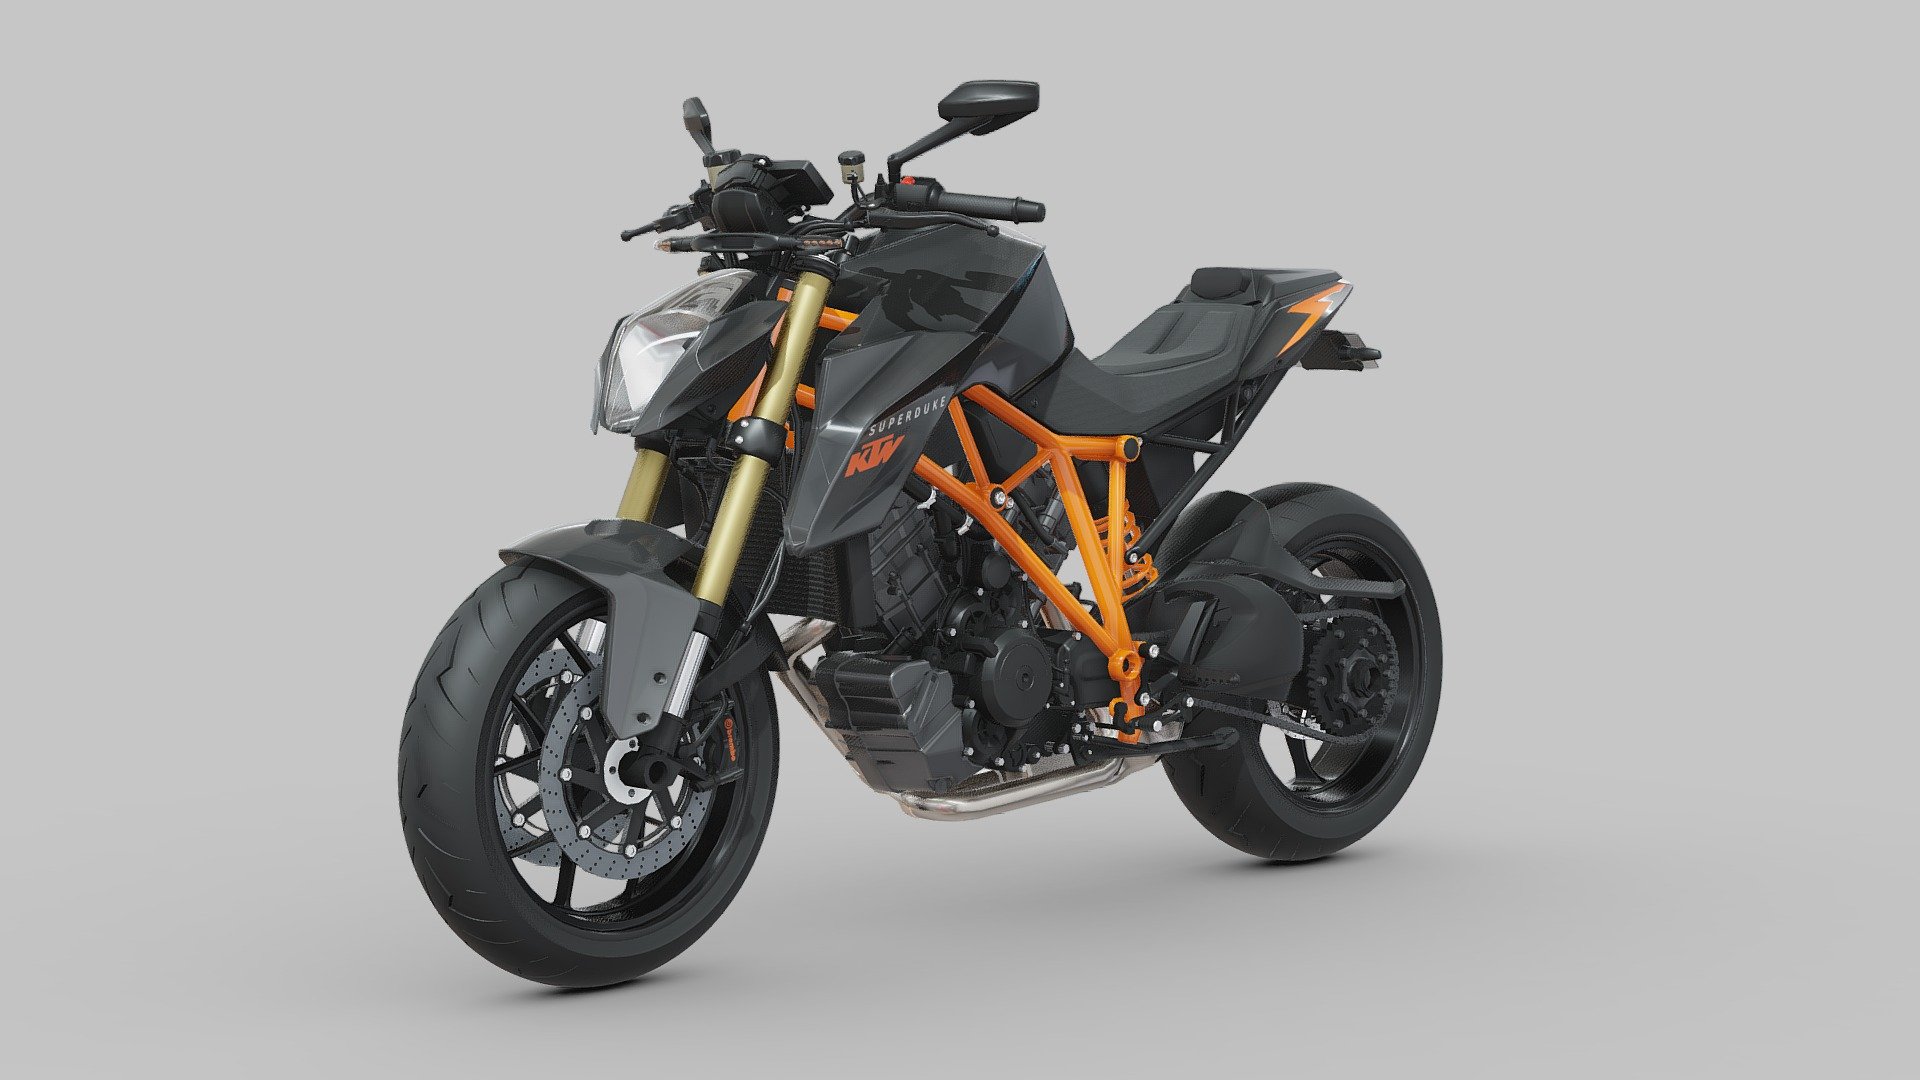 The KTM 1290 Super Duke R is a high-performance naked sport motorcycle that pushes the boundaries of power, agility, and adrenaline. Crafted by the renowned Austrian manufacturer KTM, the 1290 Super Duke R is engineered to deliver an exhilarating riding experience on both the street and the track.

At the heart of the Super Duke R is a formidable 1,301cc V-twin engine, delivering a thrilling blend of horsepower and torque that propels riders with breathtaking acceleration. Paired with advanced electronics, including multiple riding modes, traction control, and cornering ABS, the Super Duke R offers precise control and performance tailored to various riding conditions.

Equipped with advanced features such as a TFT display, smartphone connectivity, and optional performance upgrades, the KTM 1290 Super Duke R combines cutting-edge technology with raw, unfiltered excitement, making it the ultimate naked sport bike for riders who crave adrenaline-fueled thrills and uncompromising performance 3d model